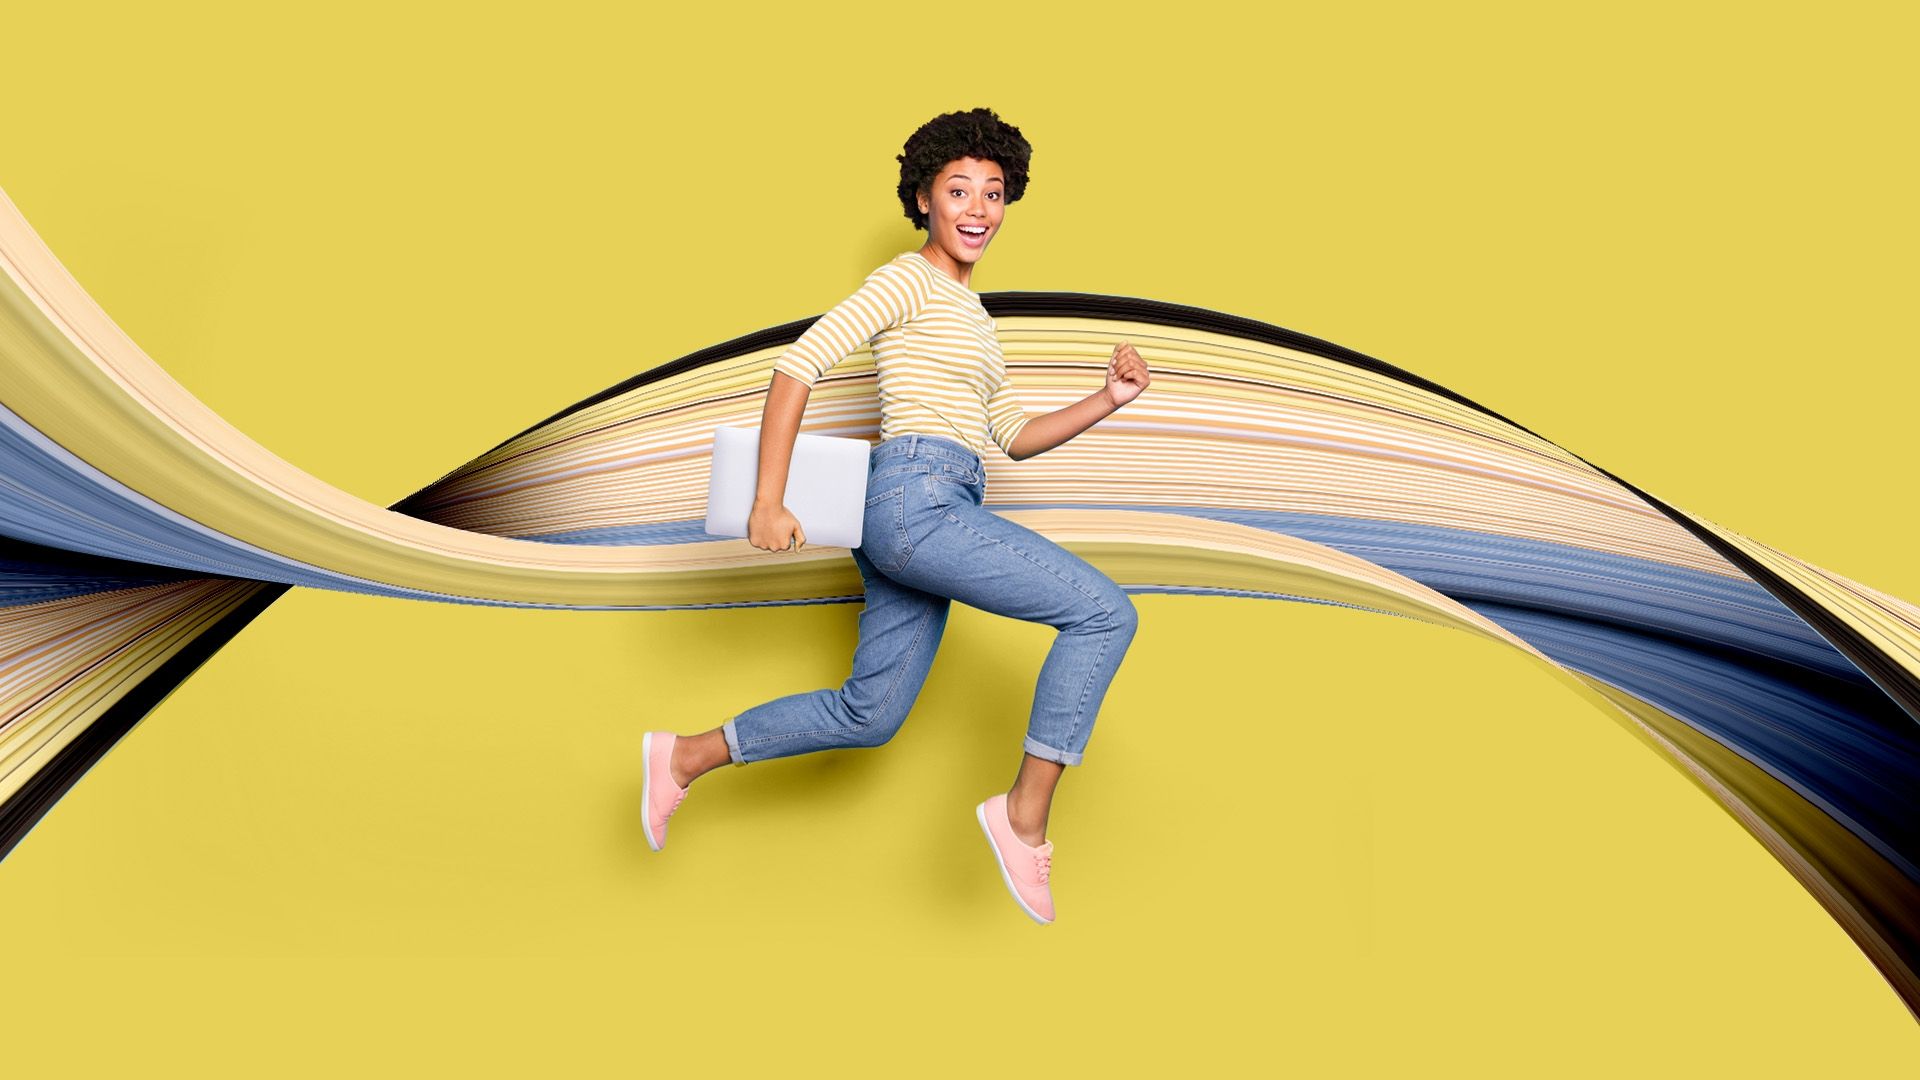 A student jumping in front of a yellow background with a swirl pattern behind